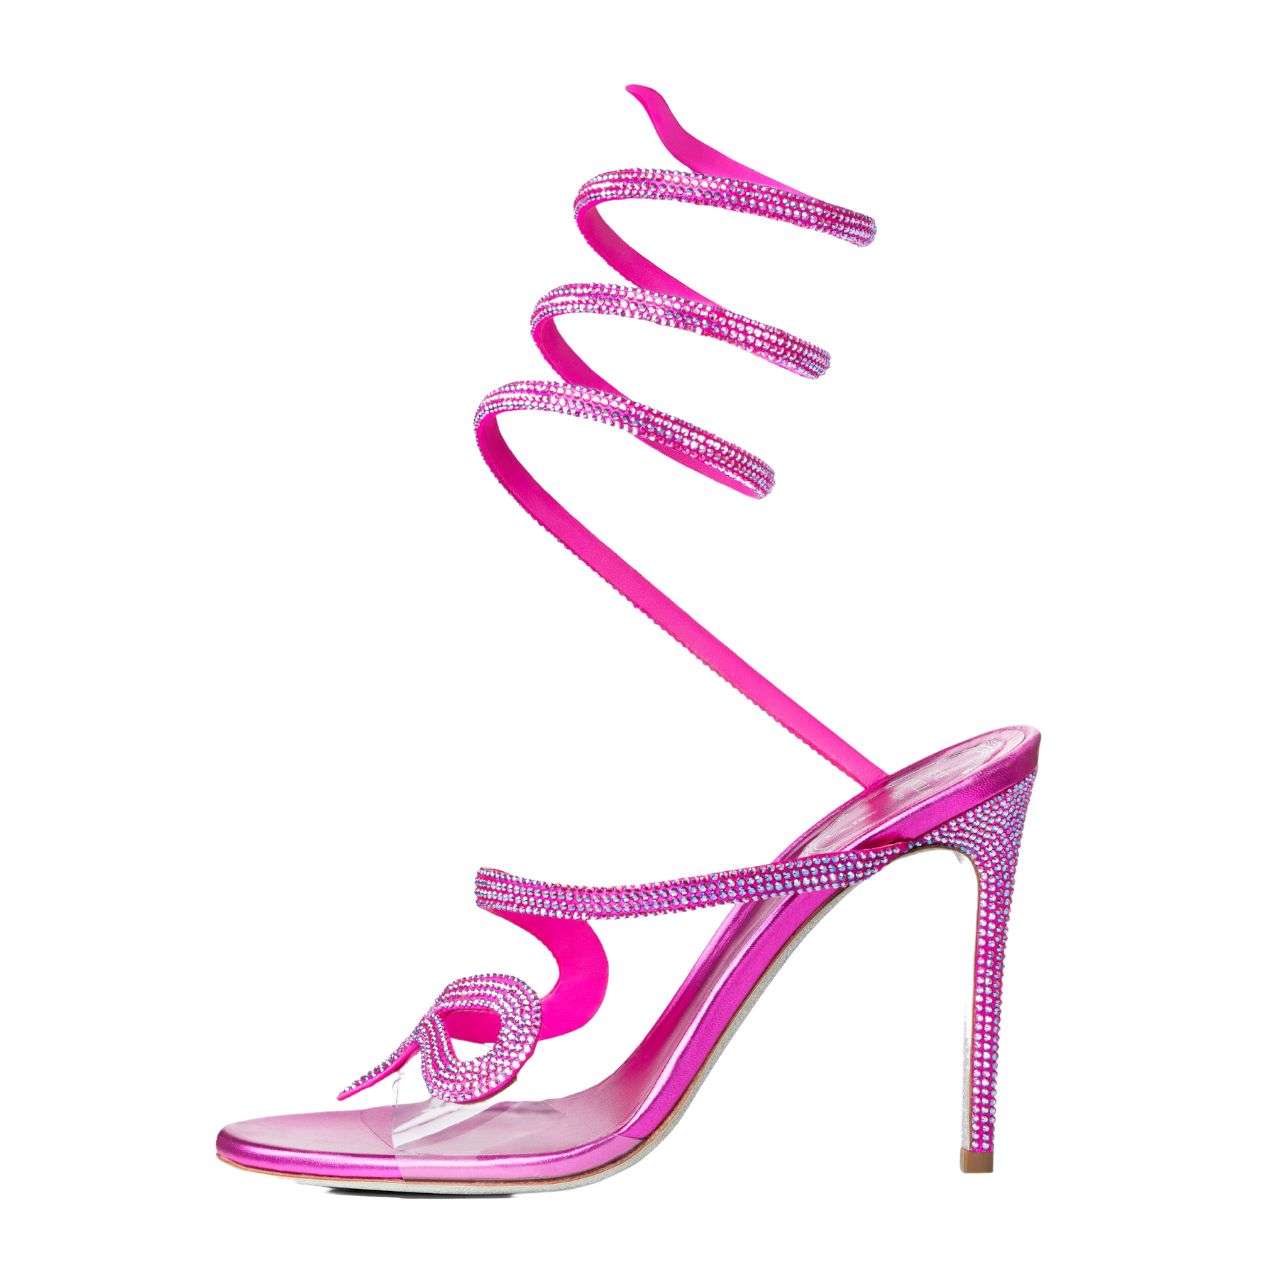 René Caovilla wrap around Cleo sandal with embellished snake in the center